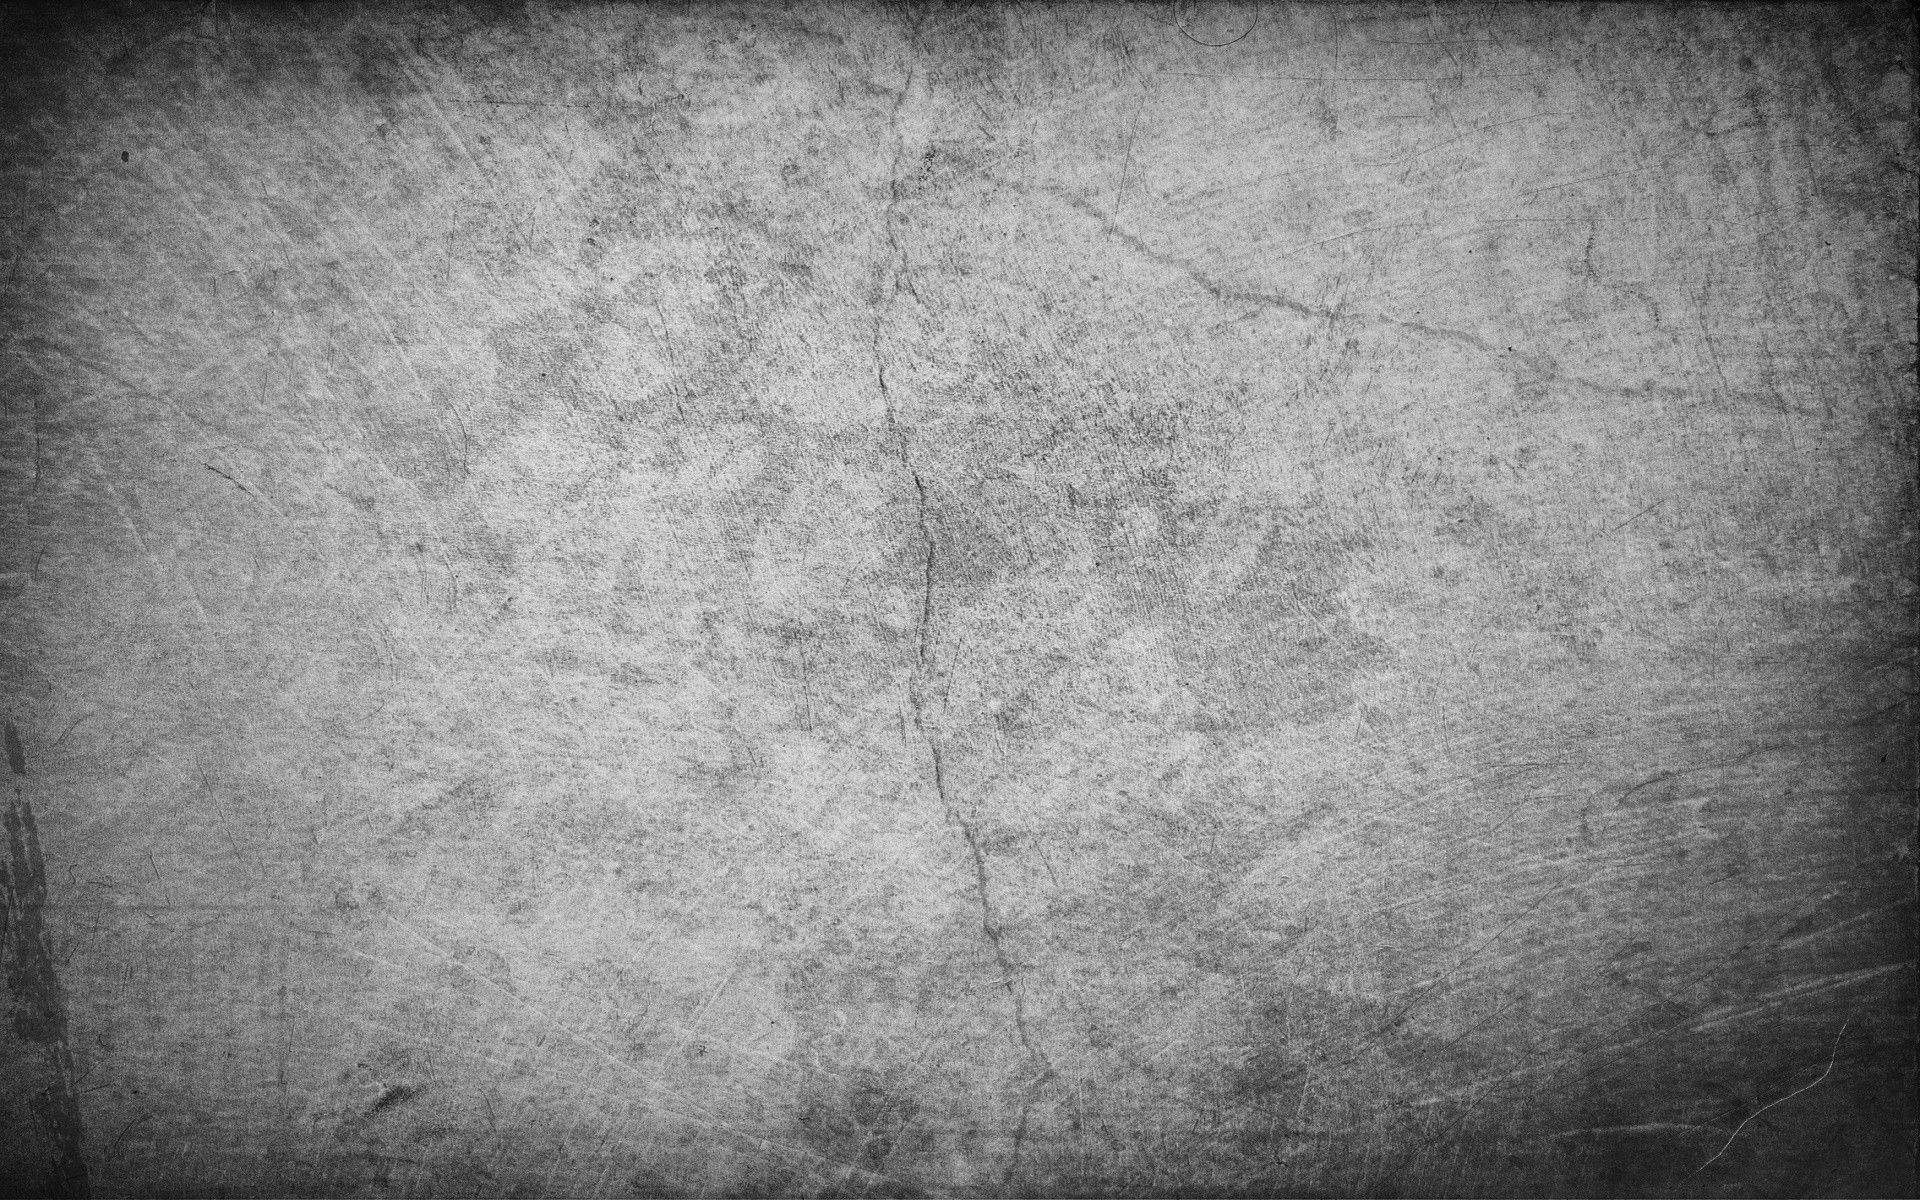 Grunge Textured Widescreen Cover Background